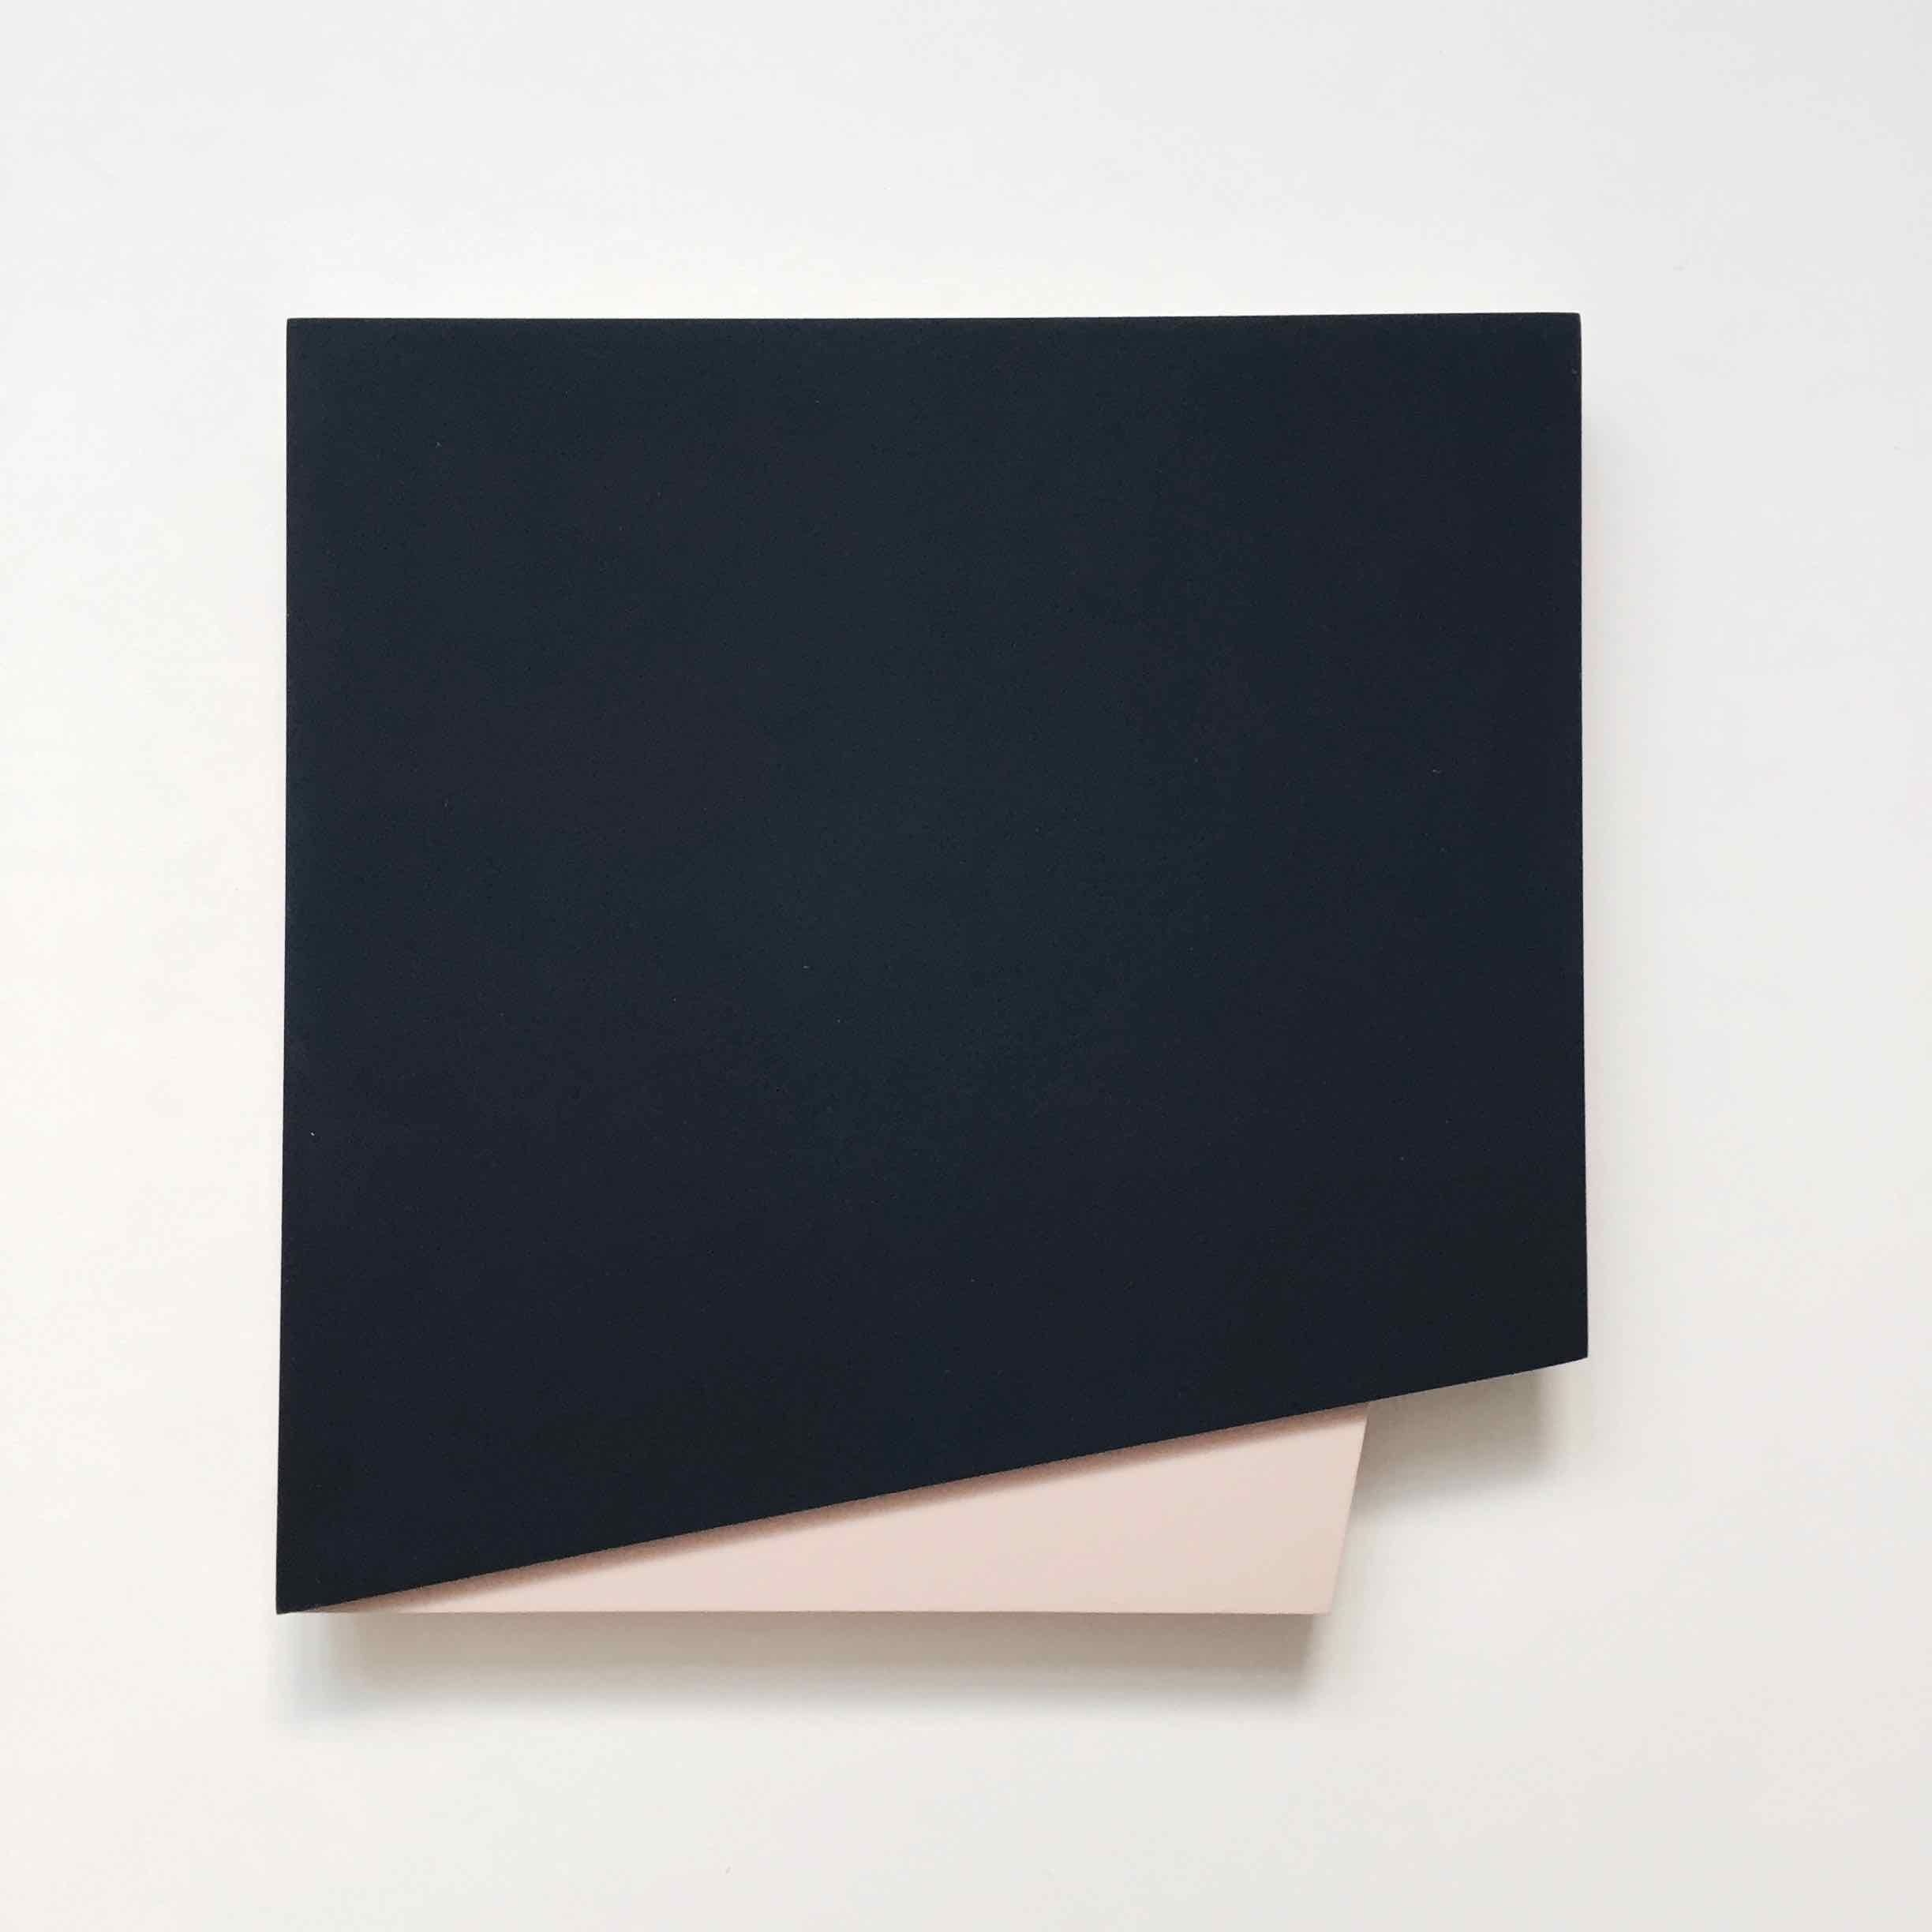 Small Folded, 2018, Carved and Painted Wood Panels, by Laura Jane Scott

Laura Jane Scott’s desire for formal simplicity through geometric form and striking use of colour has enabled her to produce a body of work where painting explores a model of